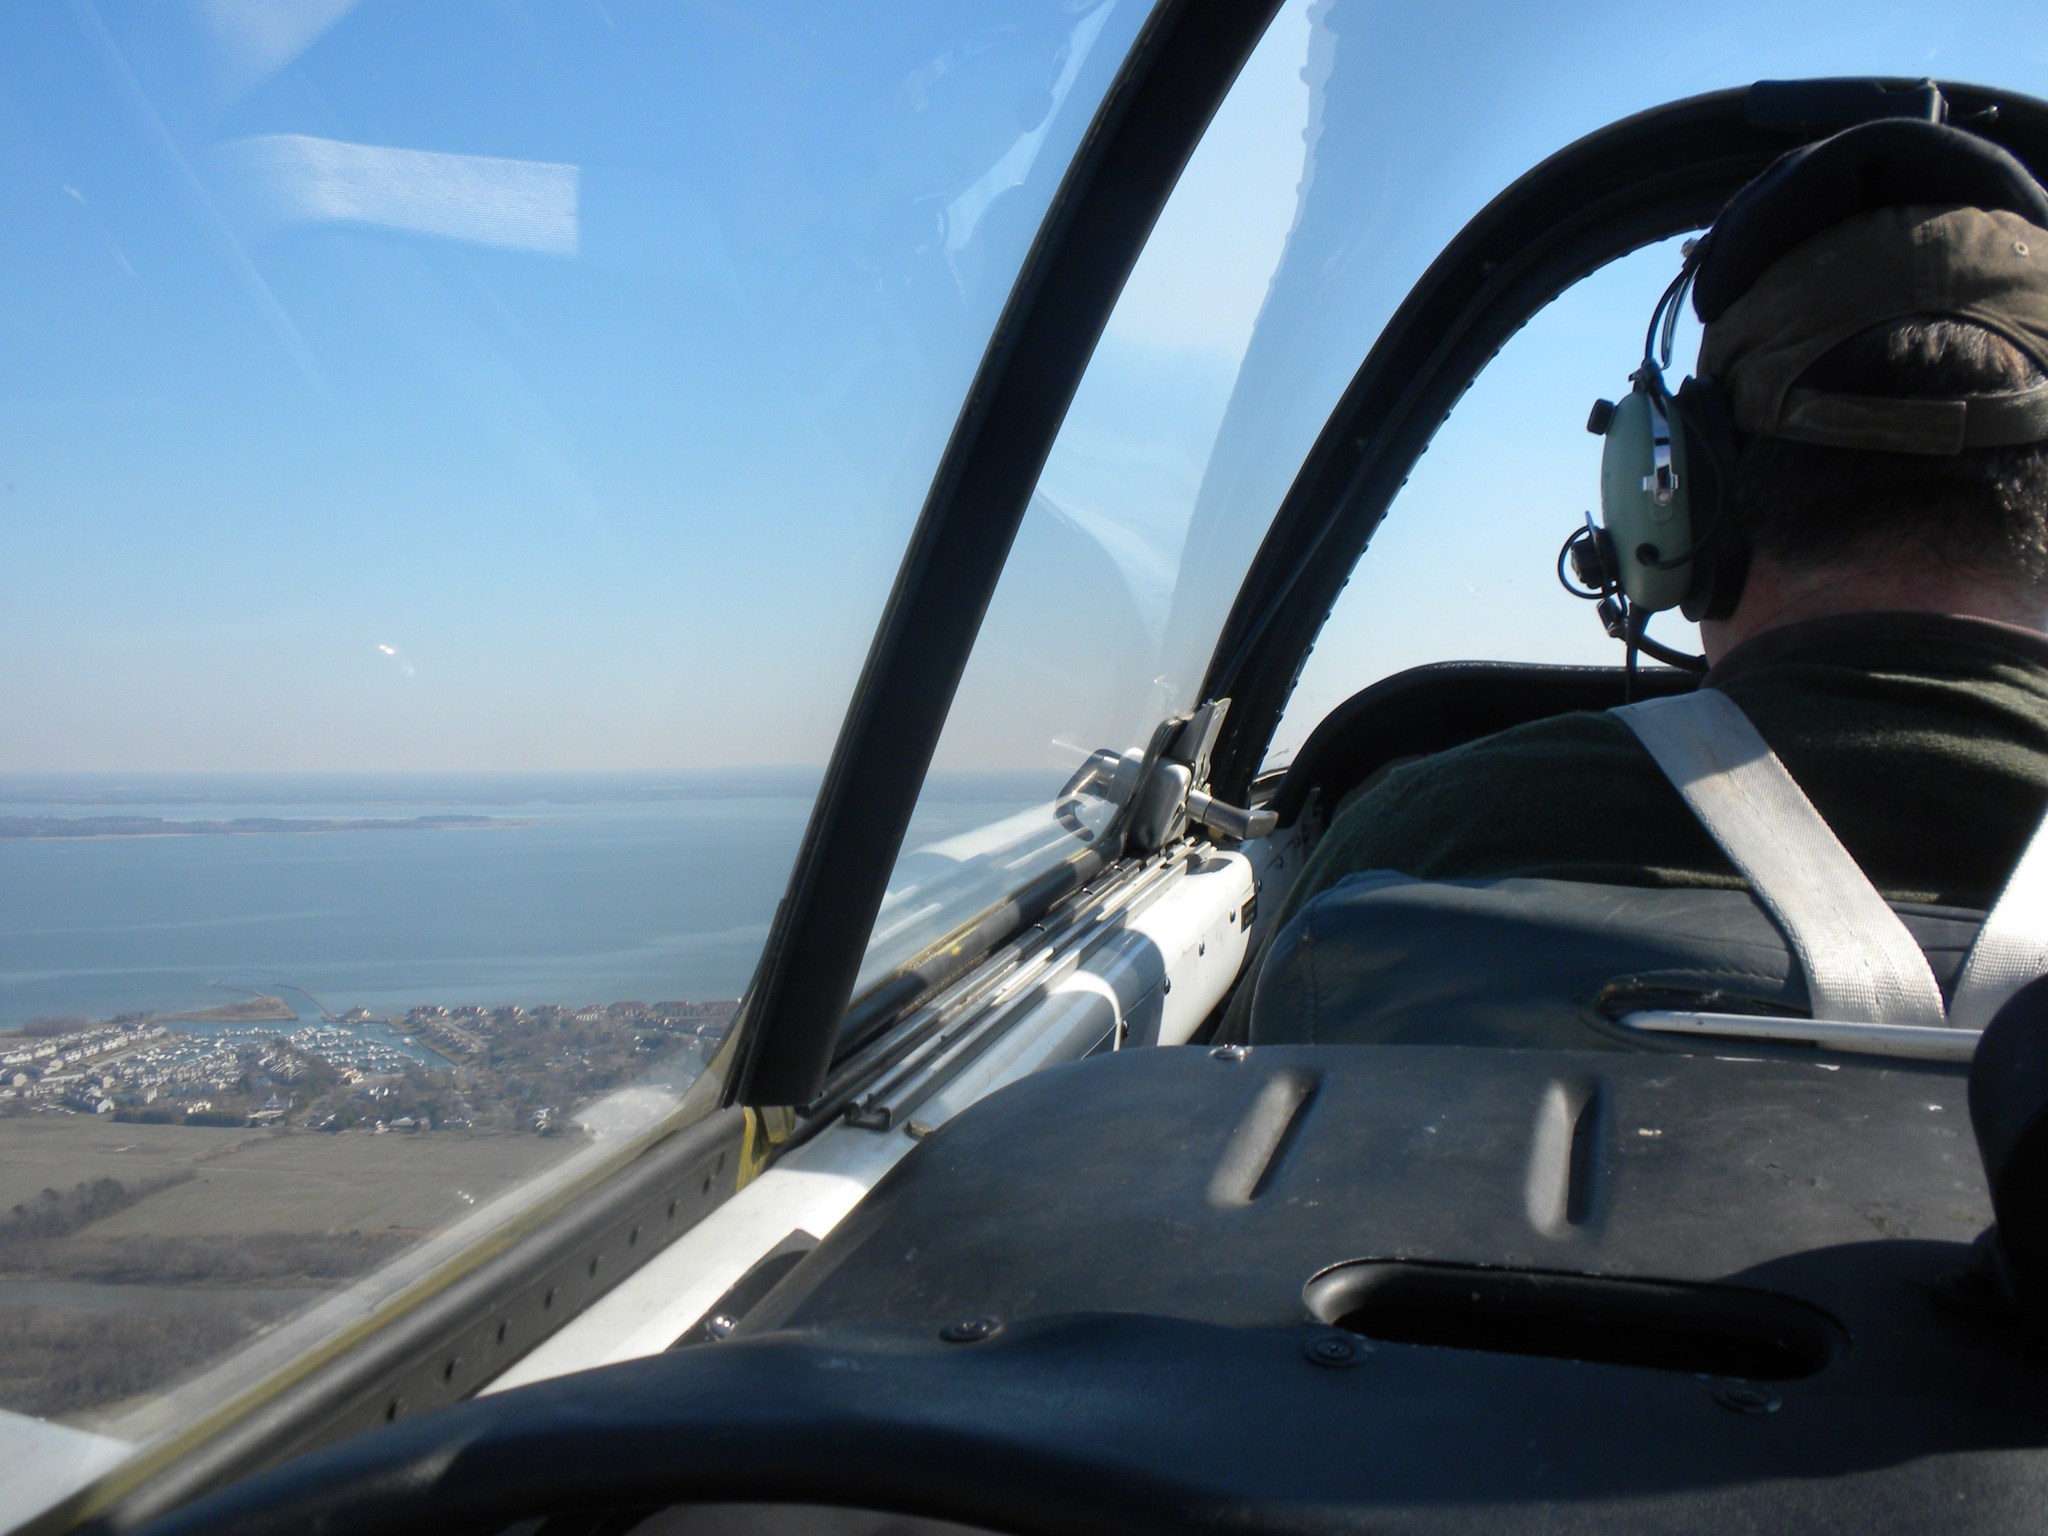 Enjoying a beautiful day of flying over the Chesapeake Bay and the Eastern Shore.